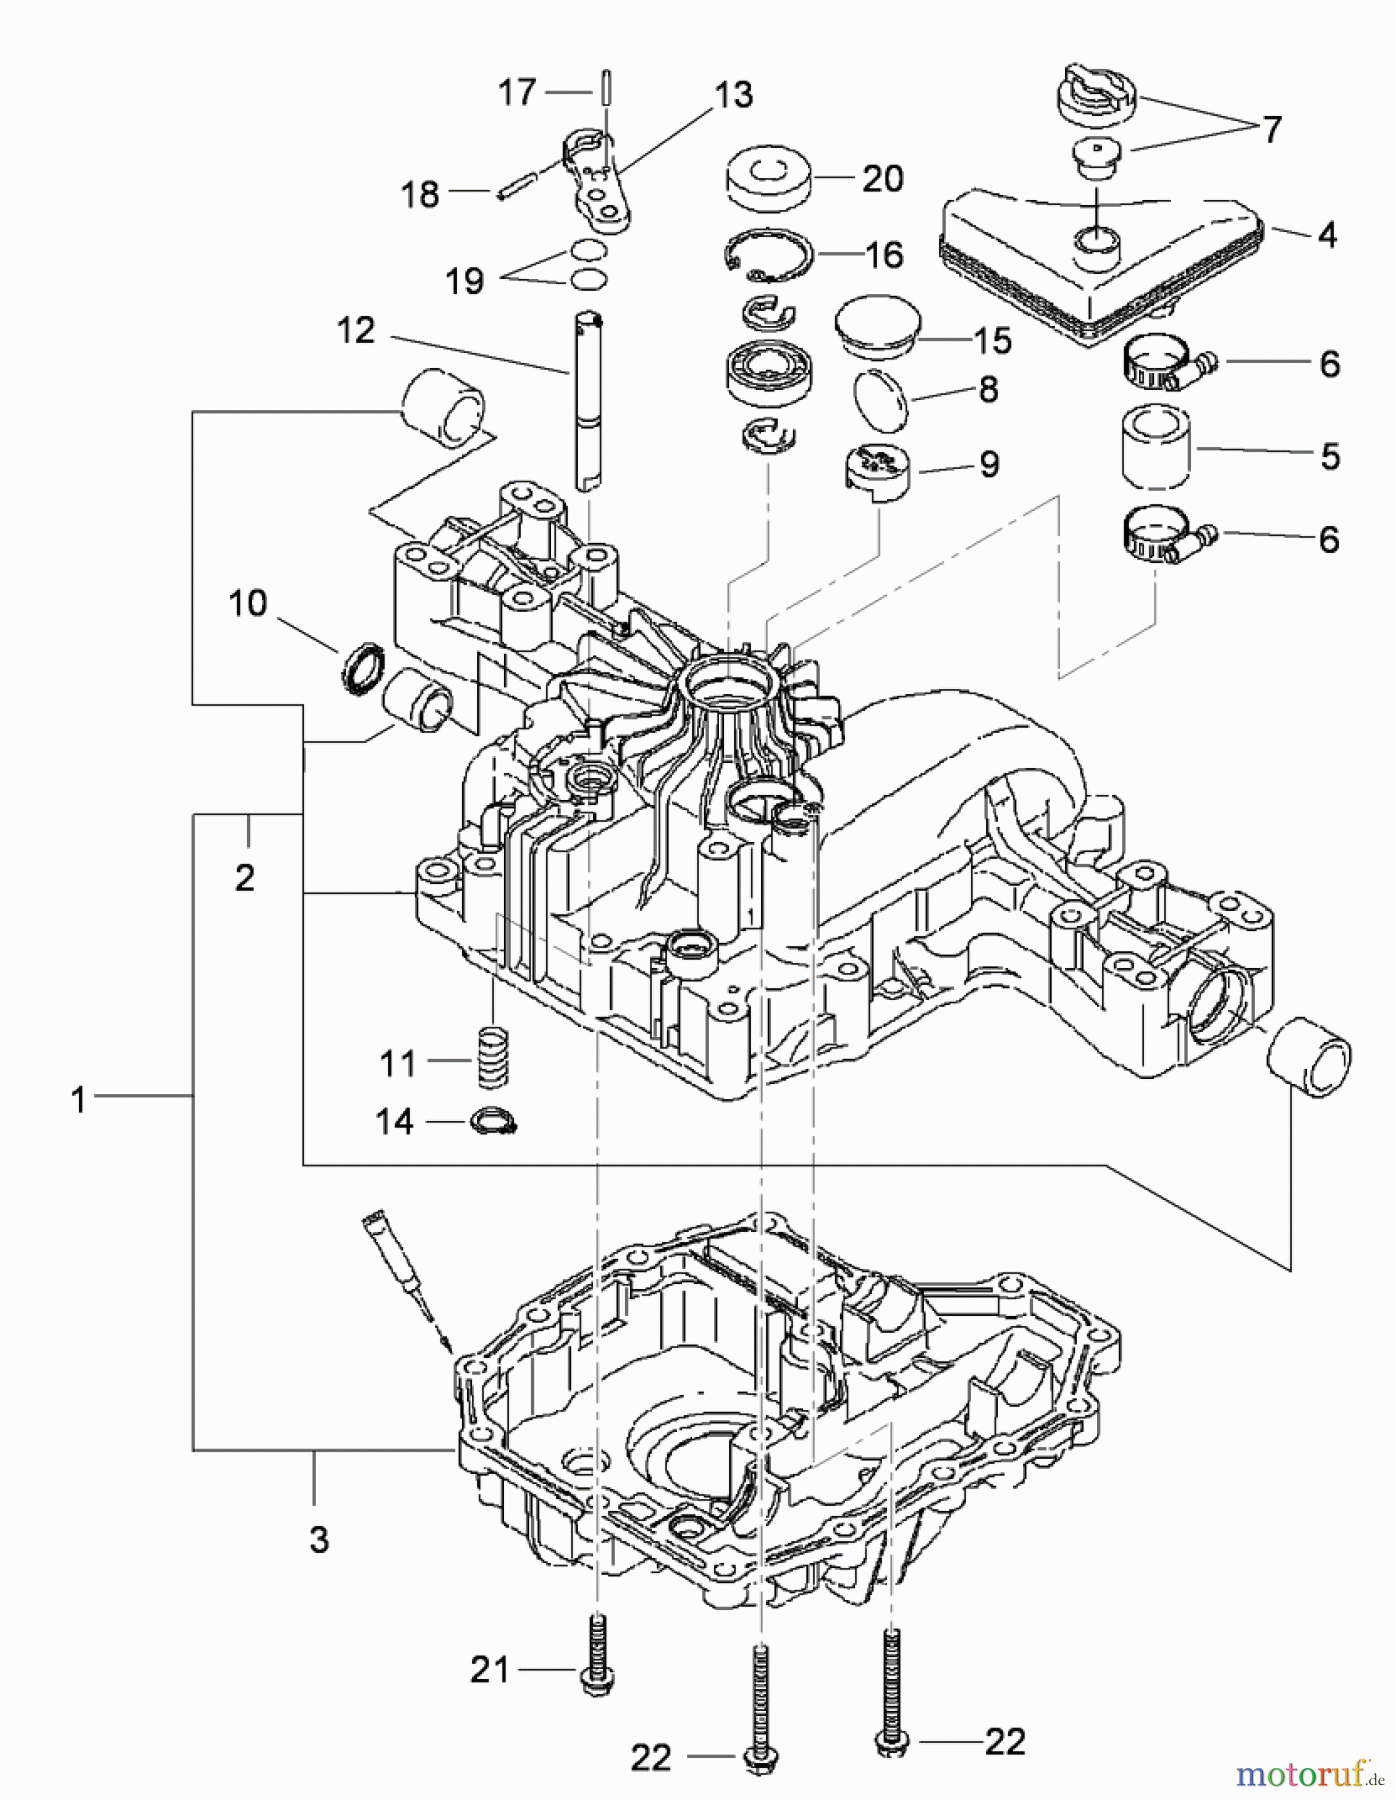  Toro Neu Mowers, Lawn & Garden Tractor Seite 1 74582 (DH 210) - Toro DH 210 Lawn Tractor, 2010 (310000001-310999999) TRANSAXLE CASE ASSEMBLY TRANSMISSION ASSEMBLY NO. 114-3155